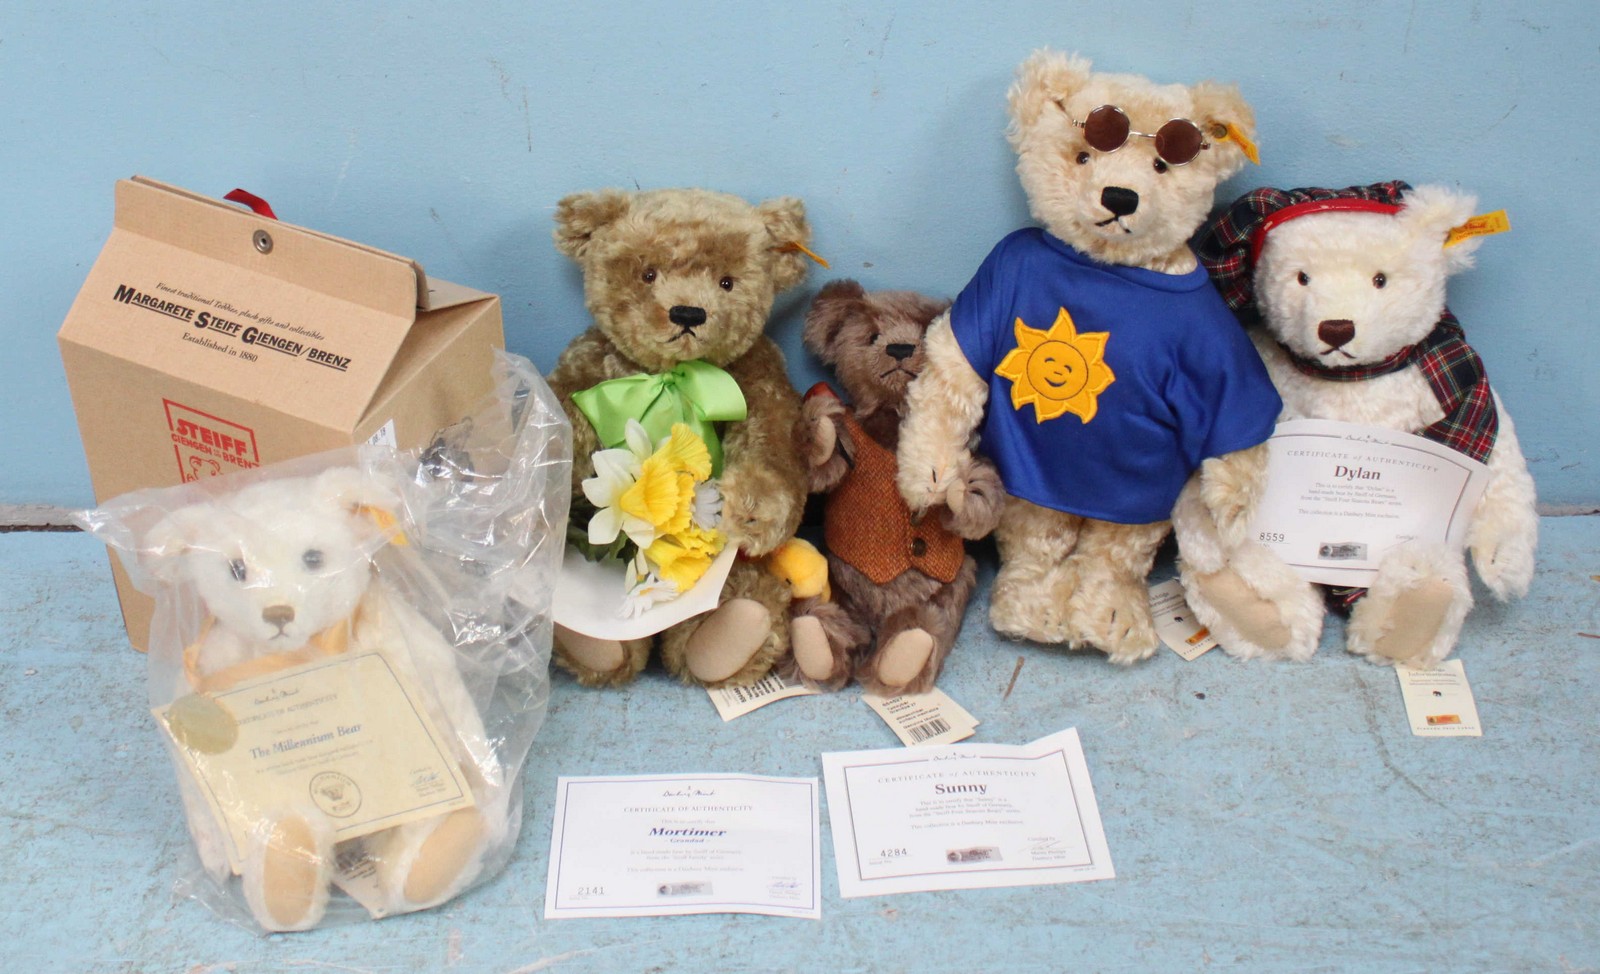 Six assorted Steiff teddy bears, all exclusively for Danbury Mint, including 'Hamish', 'Mortimer'